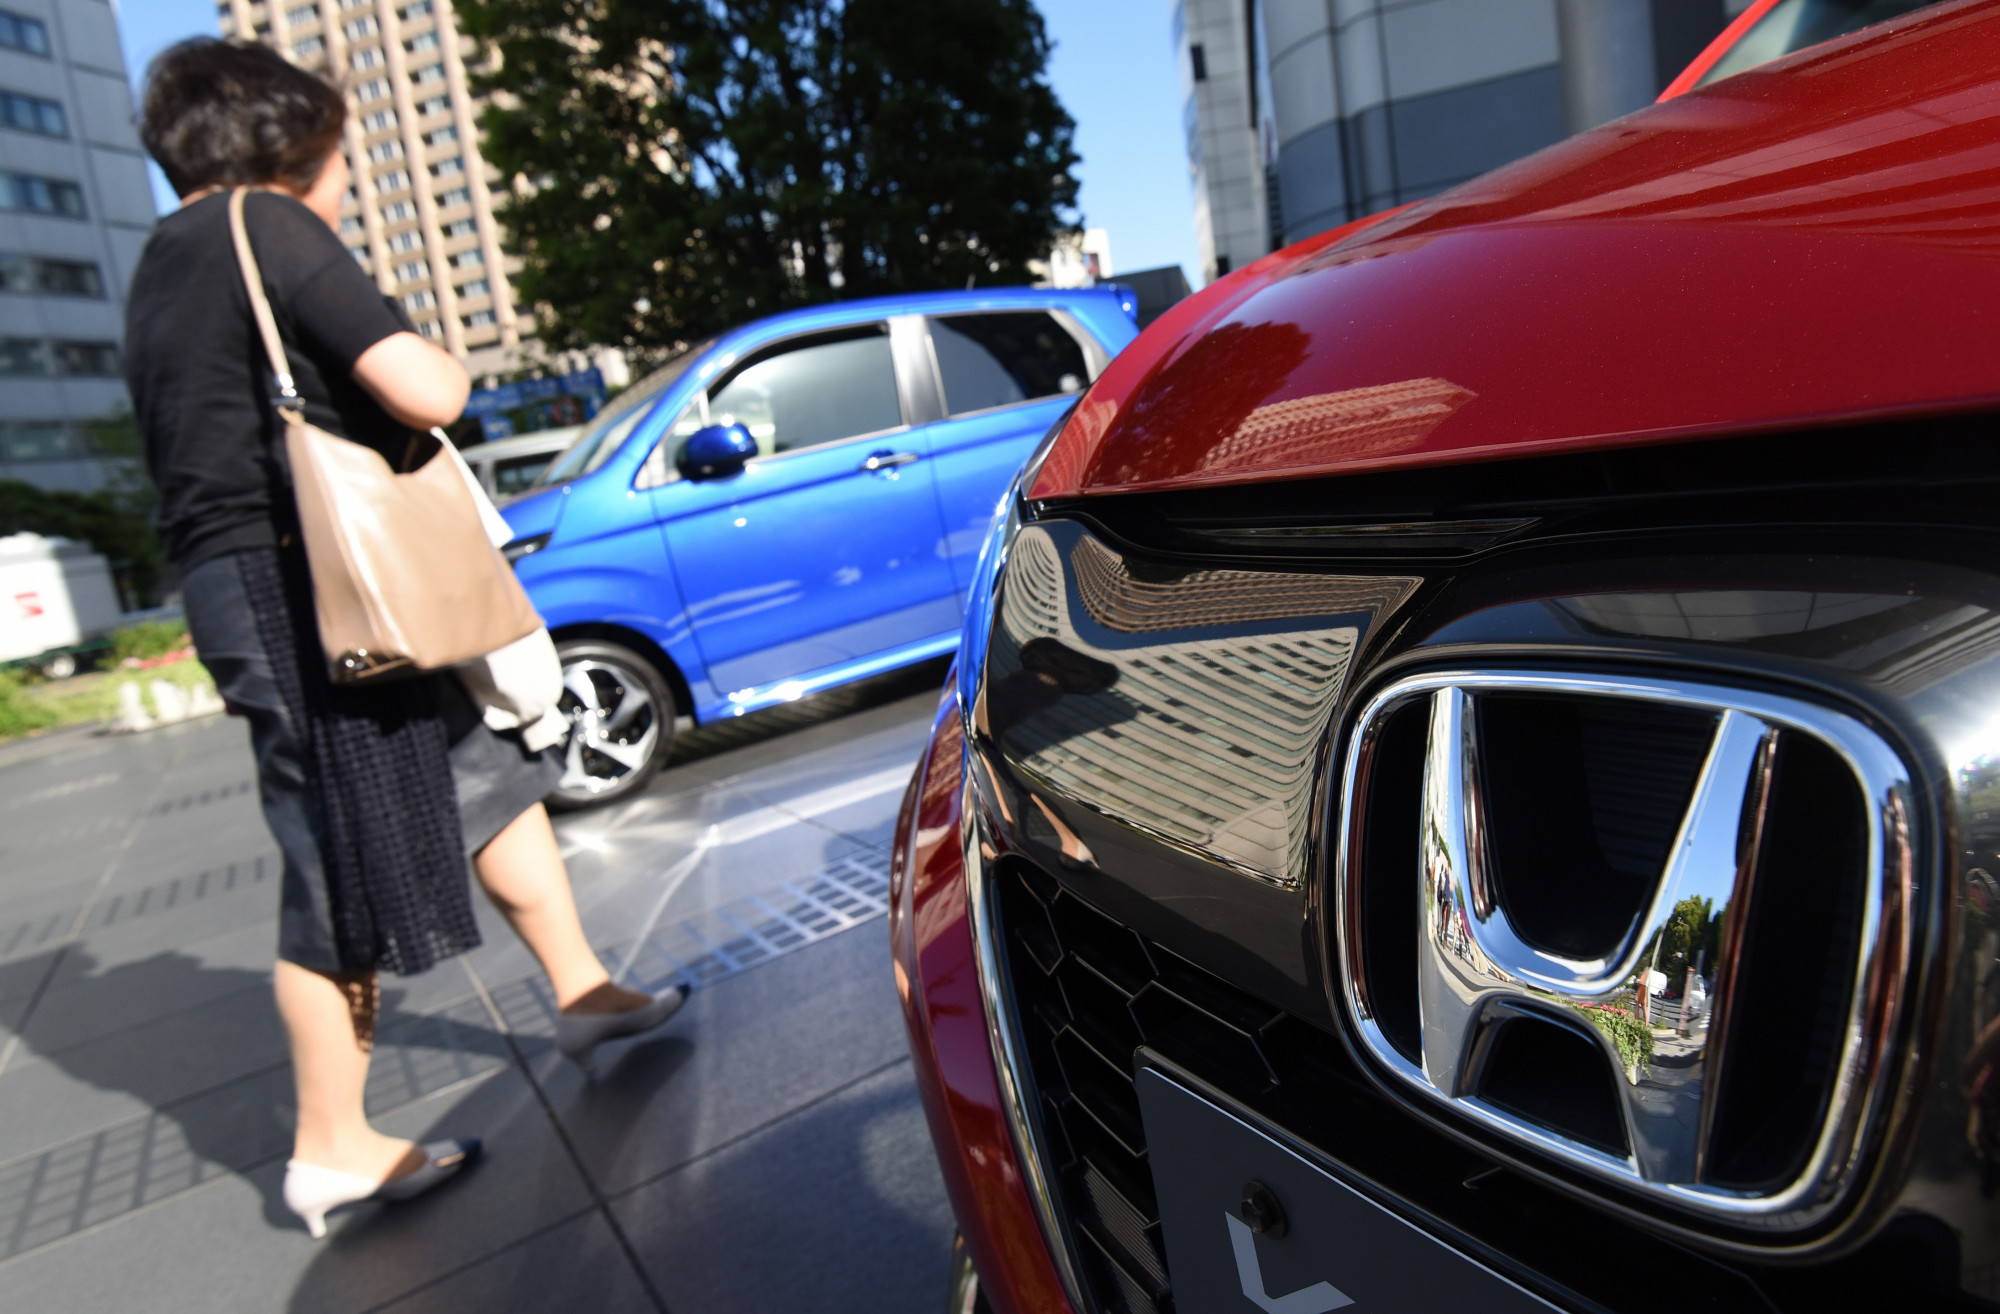 Honda Motor Units to Pay $85 Million to Settle US States’ Probe Over Takata Air Bags